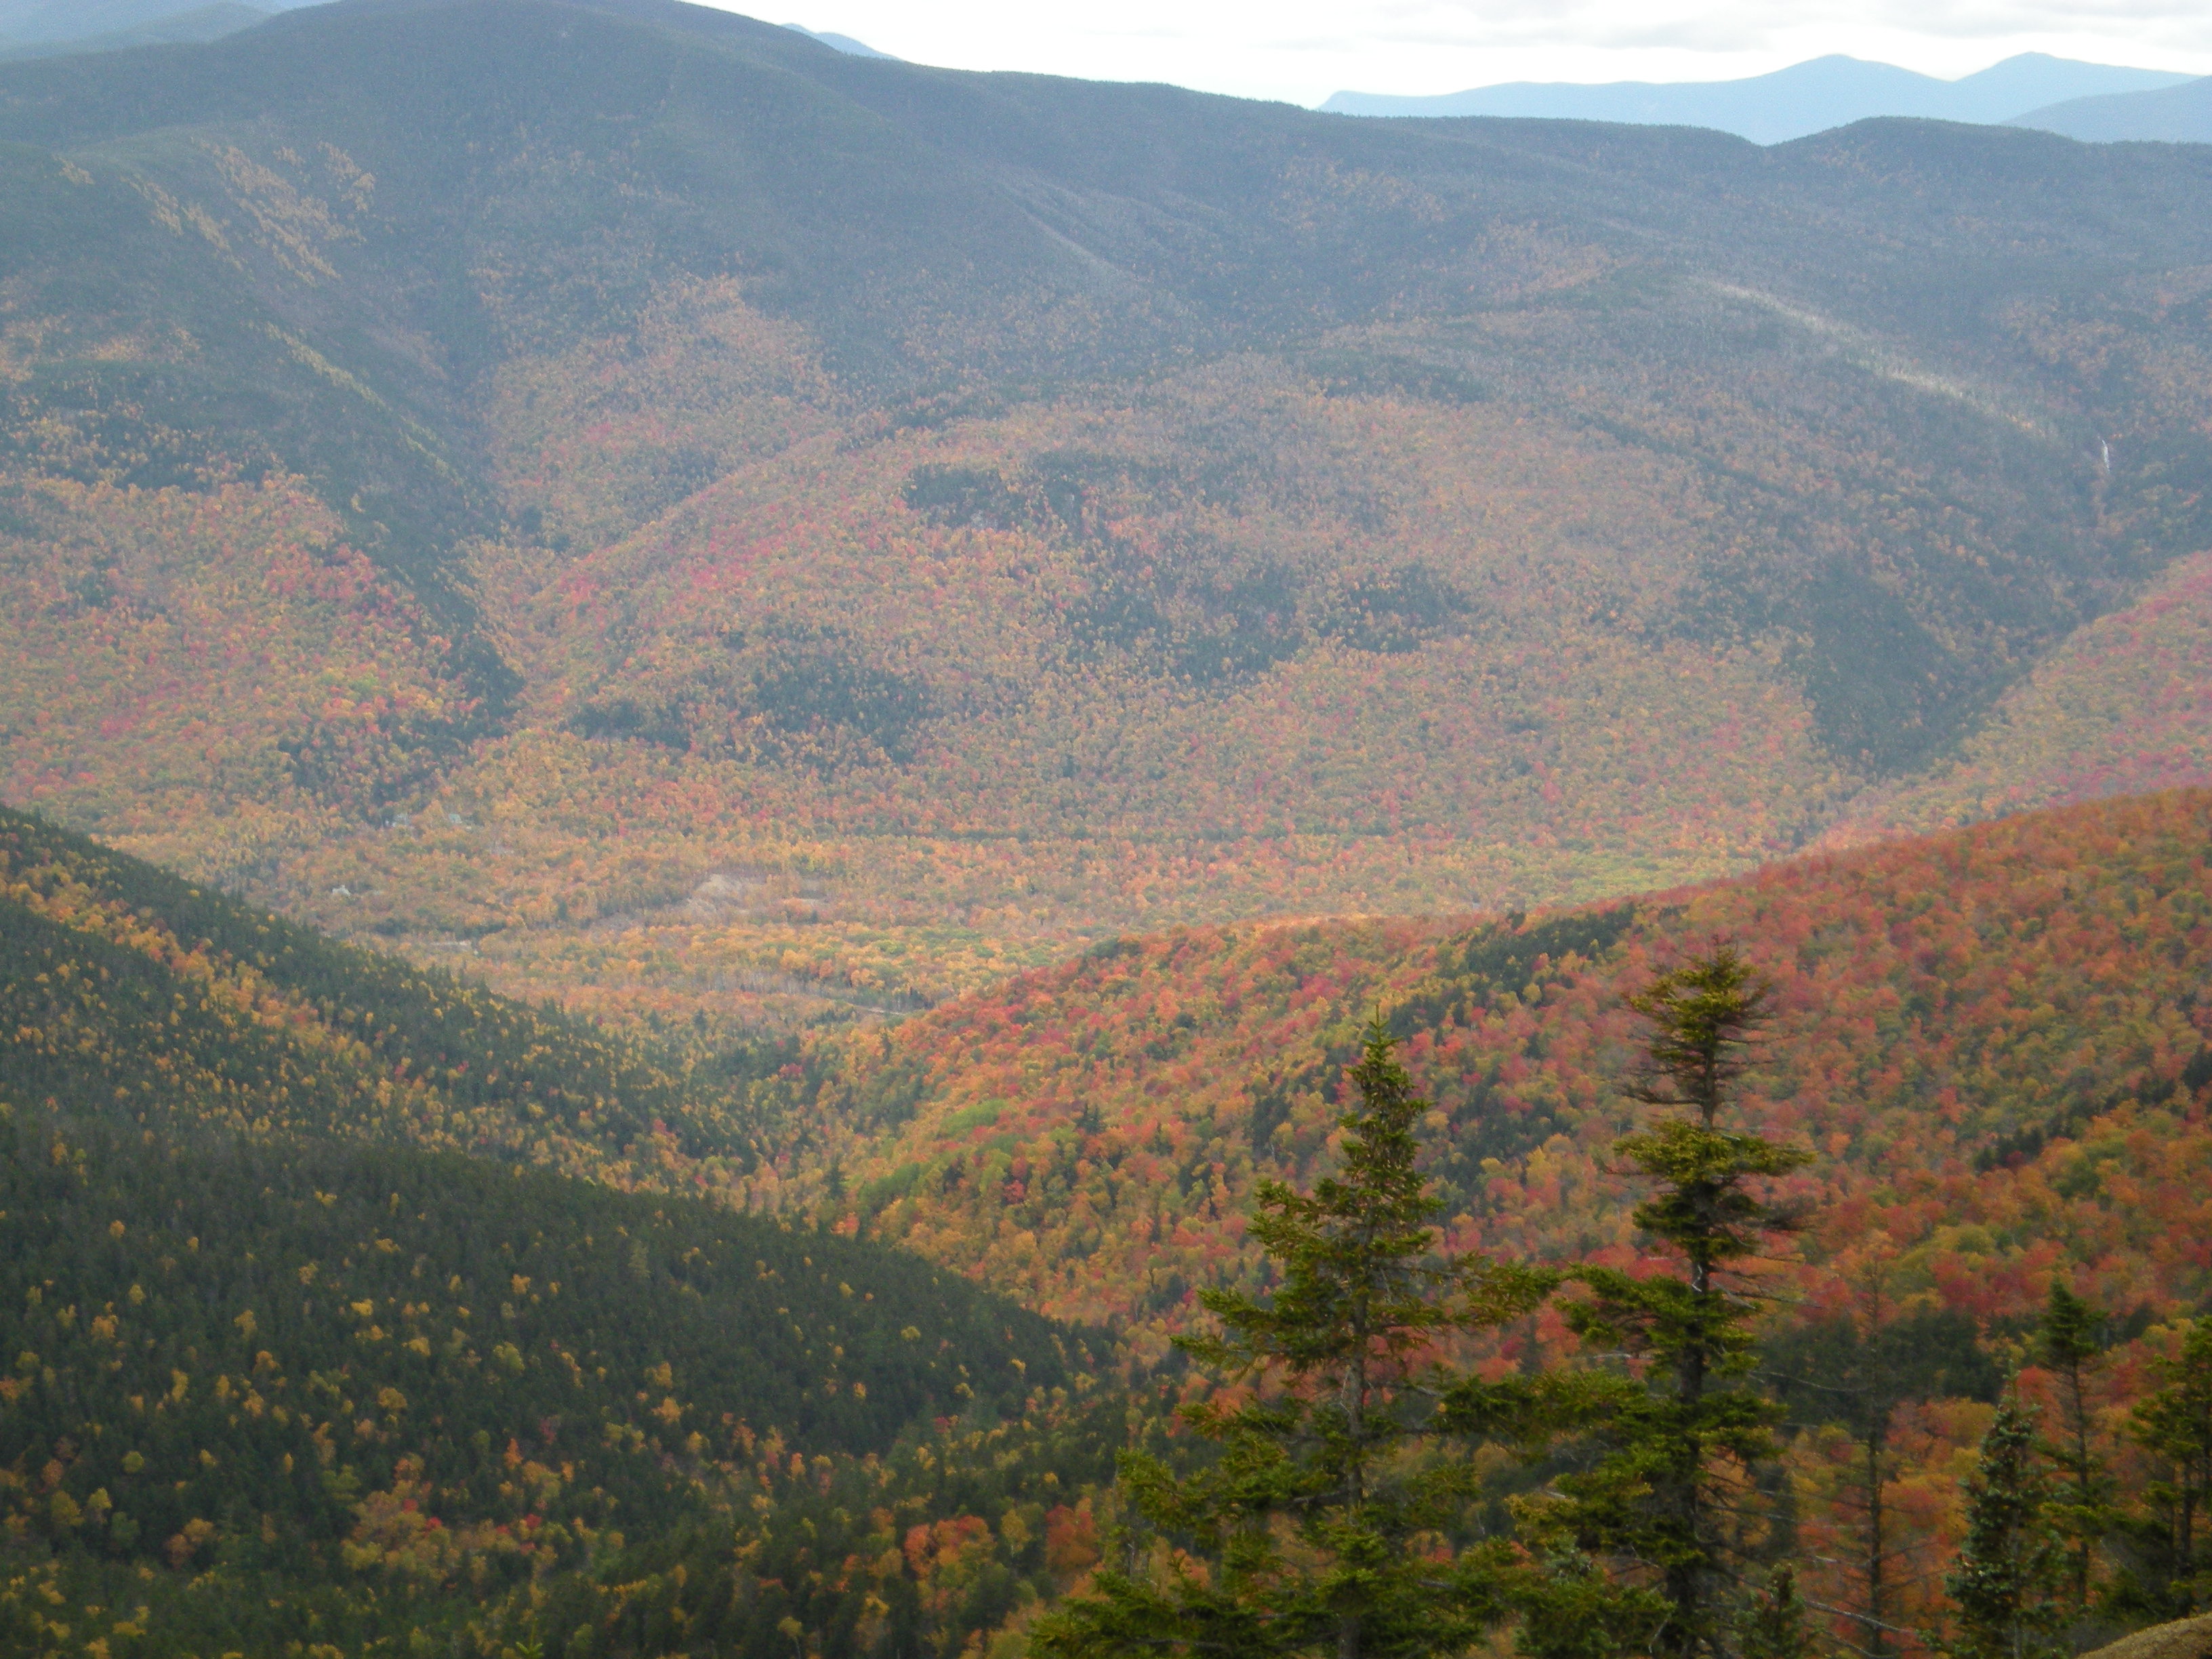 View of the Saco Valley to the south.